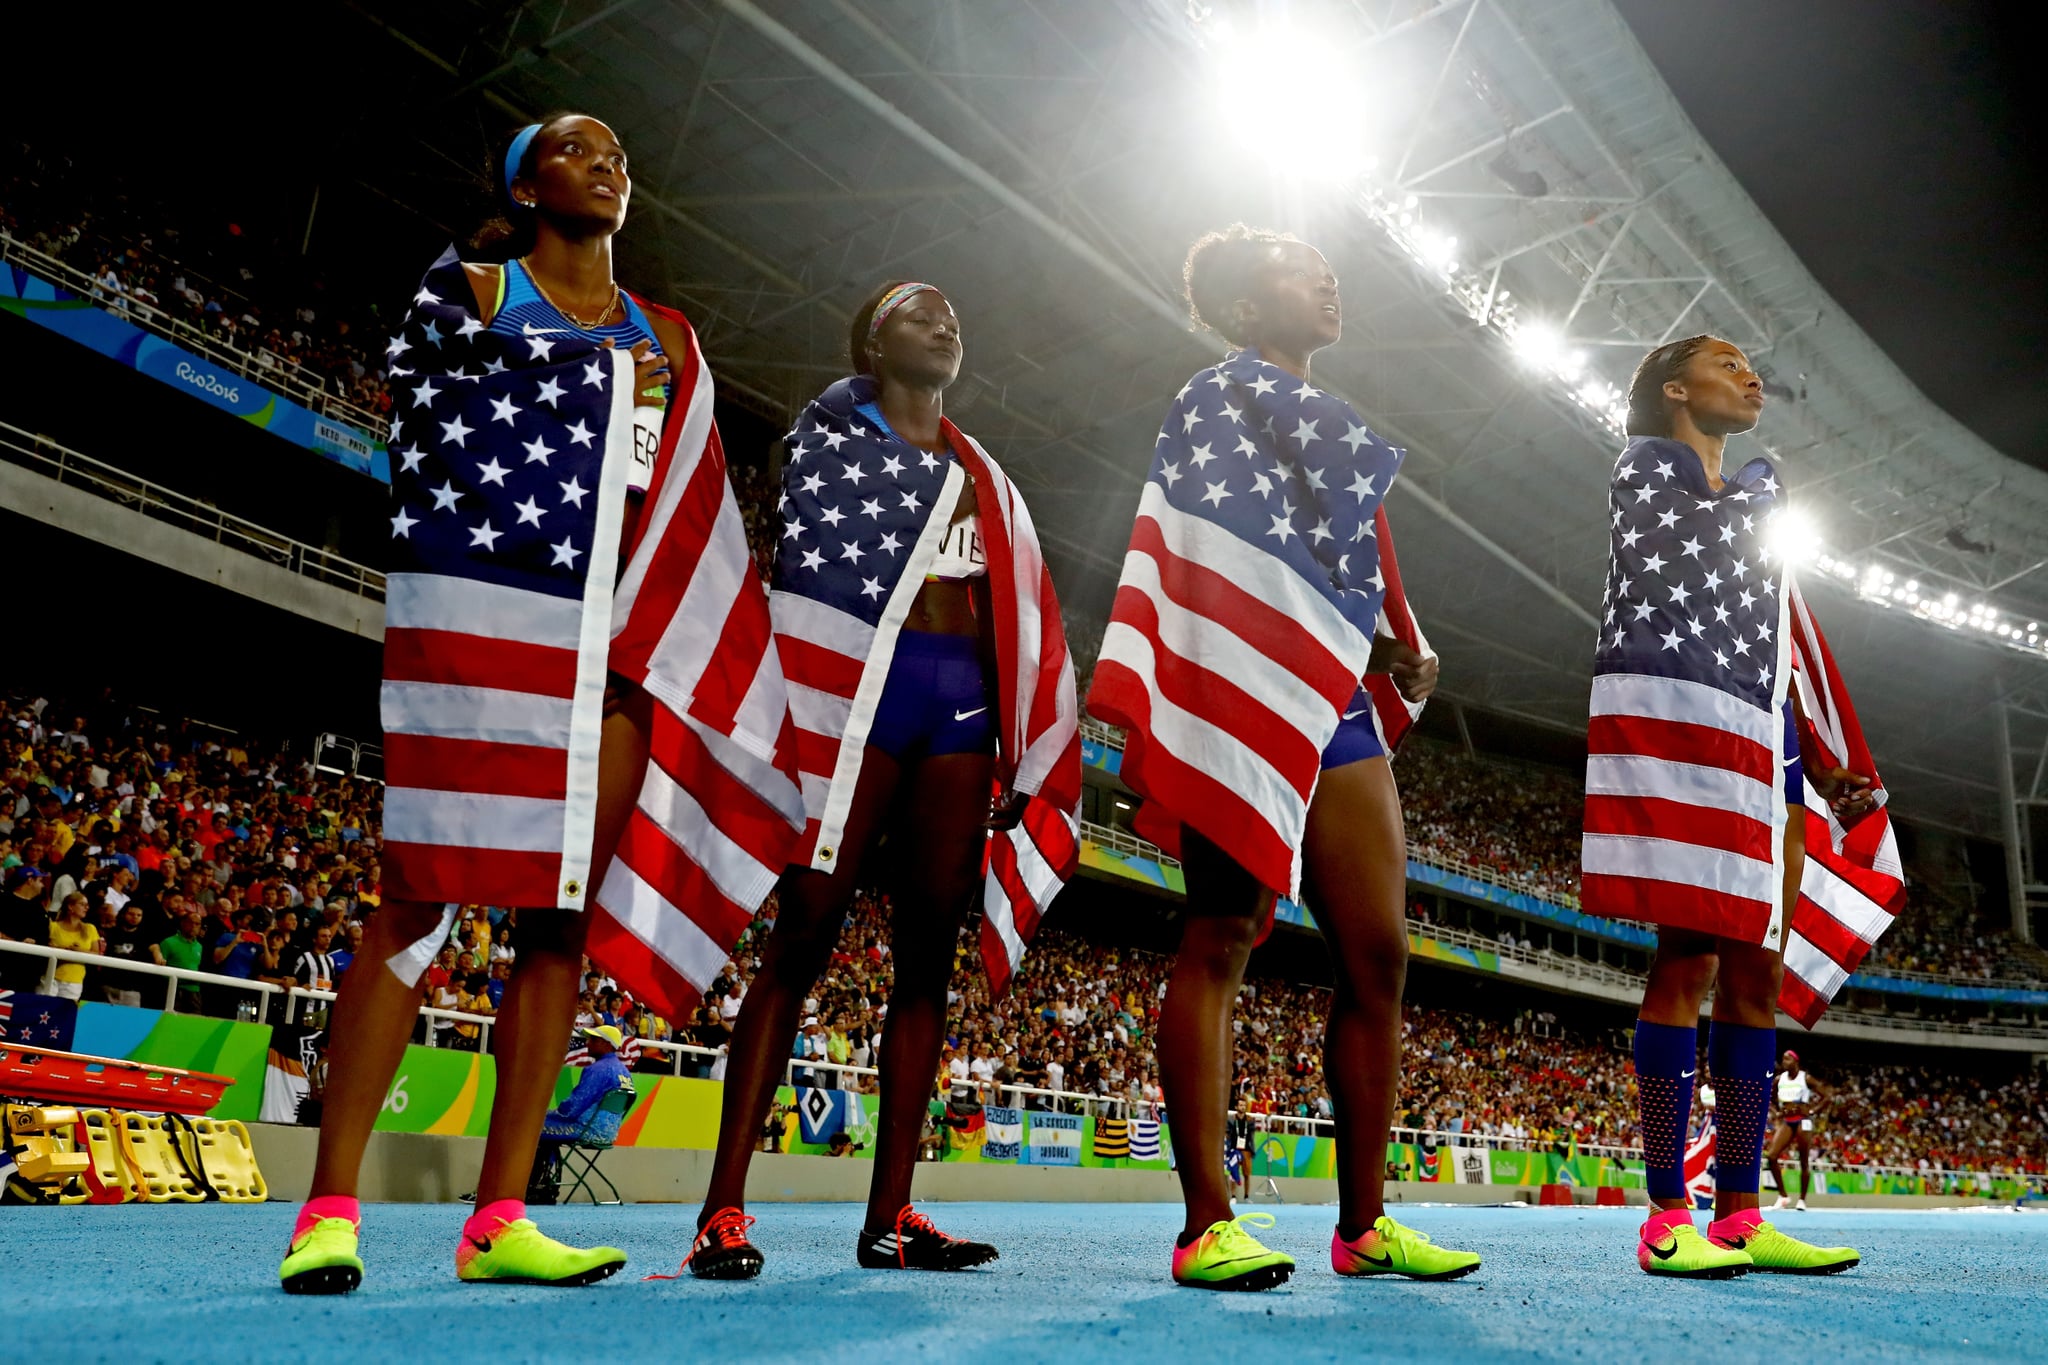 RIO DE JANEIRO, BRAZIL - AUGUST 19:  English Gardner, Allyson Felix, Tianna Bartoletta and Tori Bowie of the United States celebrate winning gold in the Women's 4 x 100m Relay Final on Day 14 of the Rio 2016 Olympic Games at the Olympic Stadium on August 19, 2016 in Rio de Janeiro, Brazil.  (Photo by Alexander Hassenstein/Getty Images)